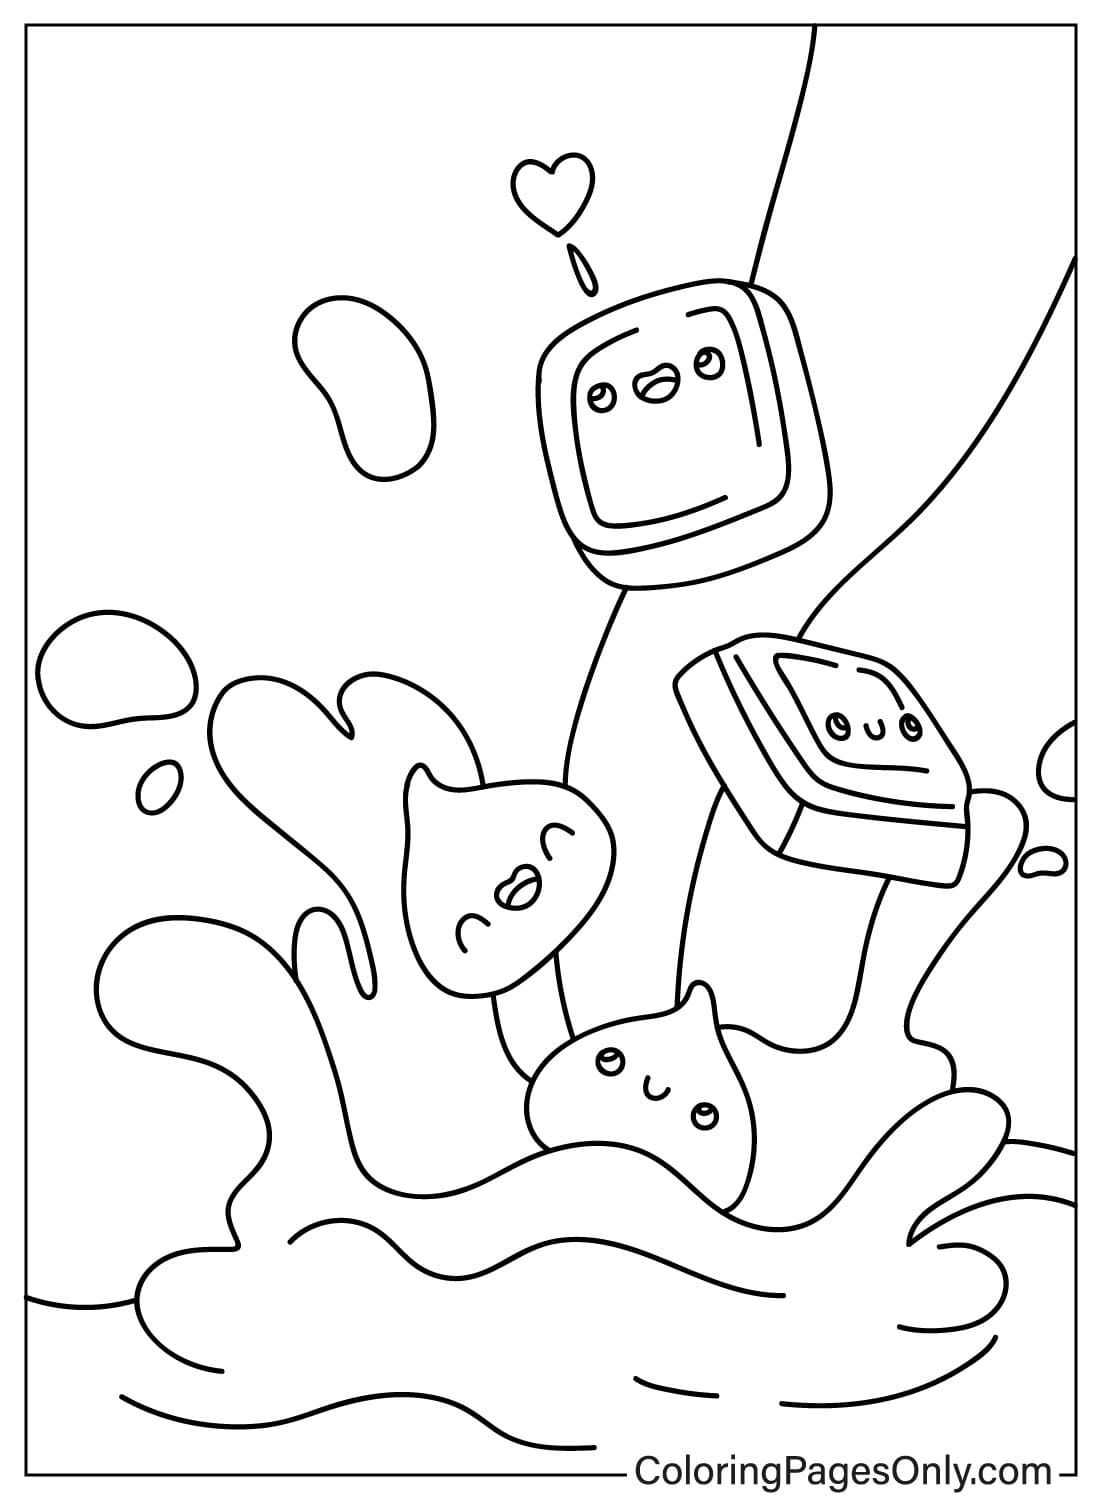 Chocolate Coloring Page Cute from Chocolate